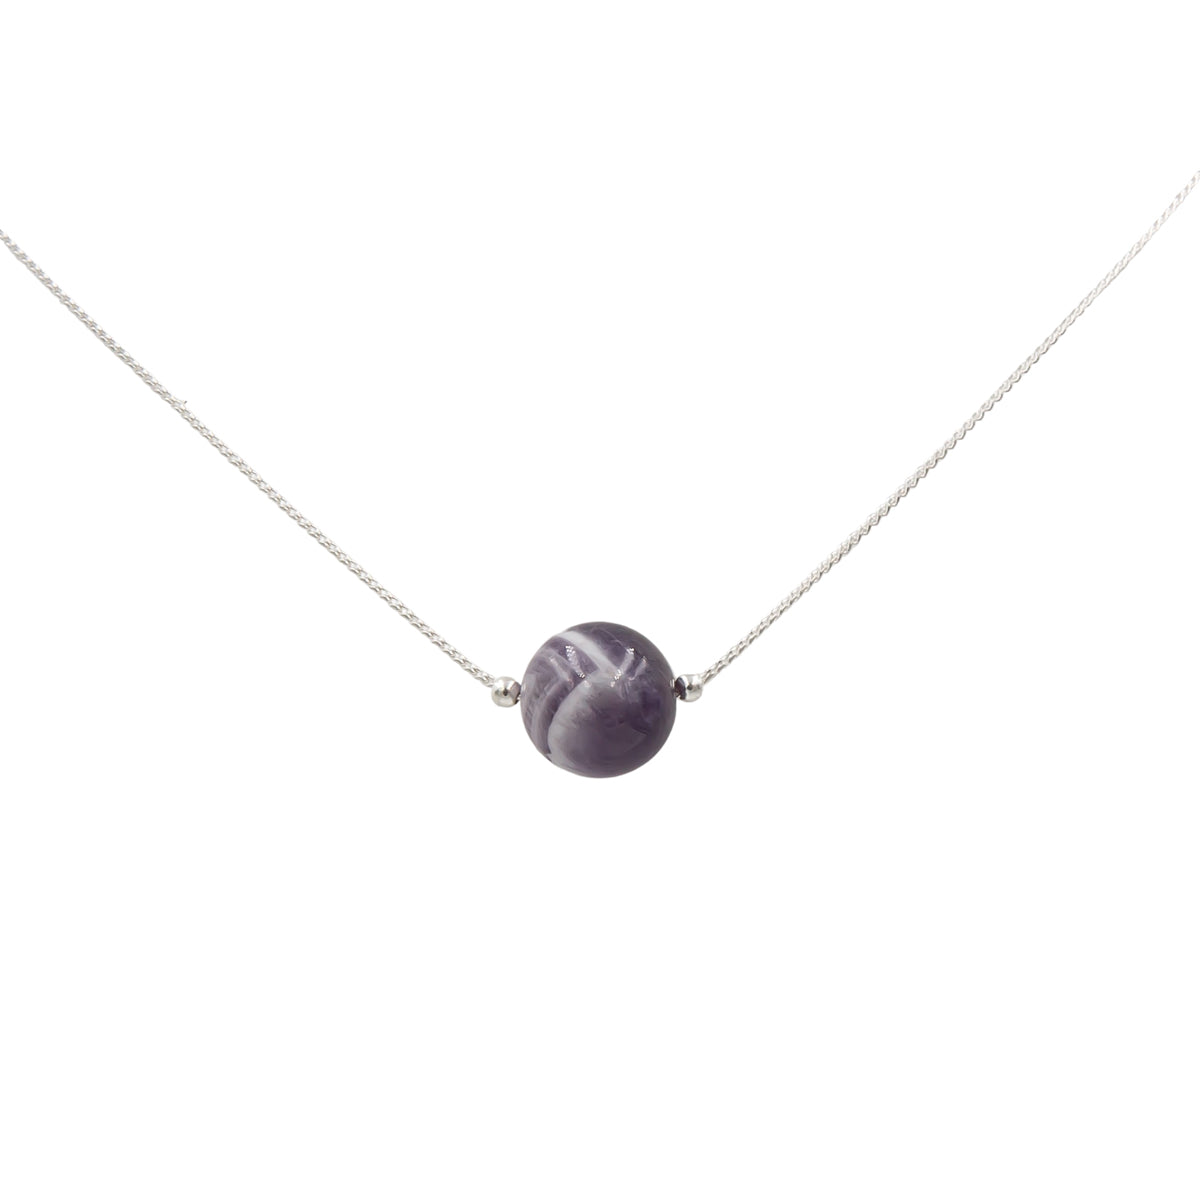 Amethyst Solitaire Sterling Silver Necklace - Shop Online at Earth